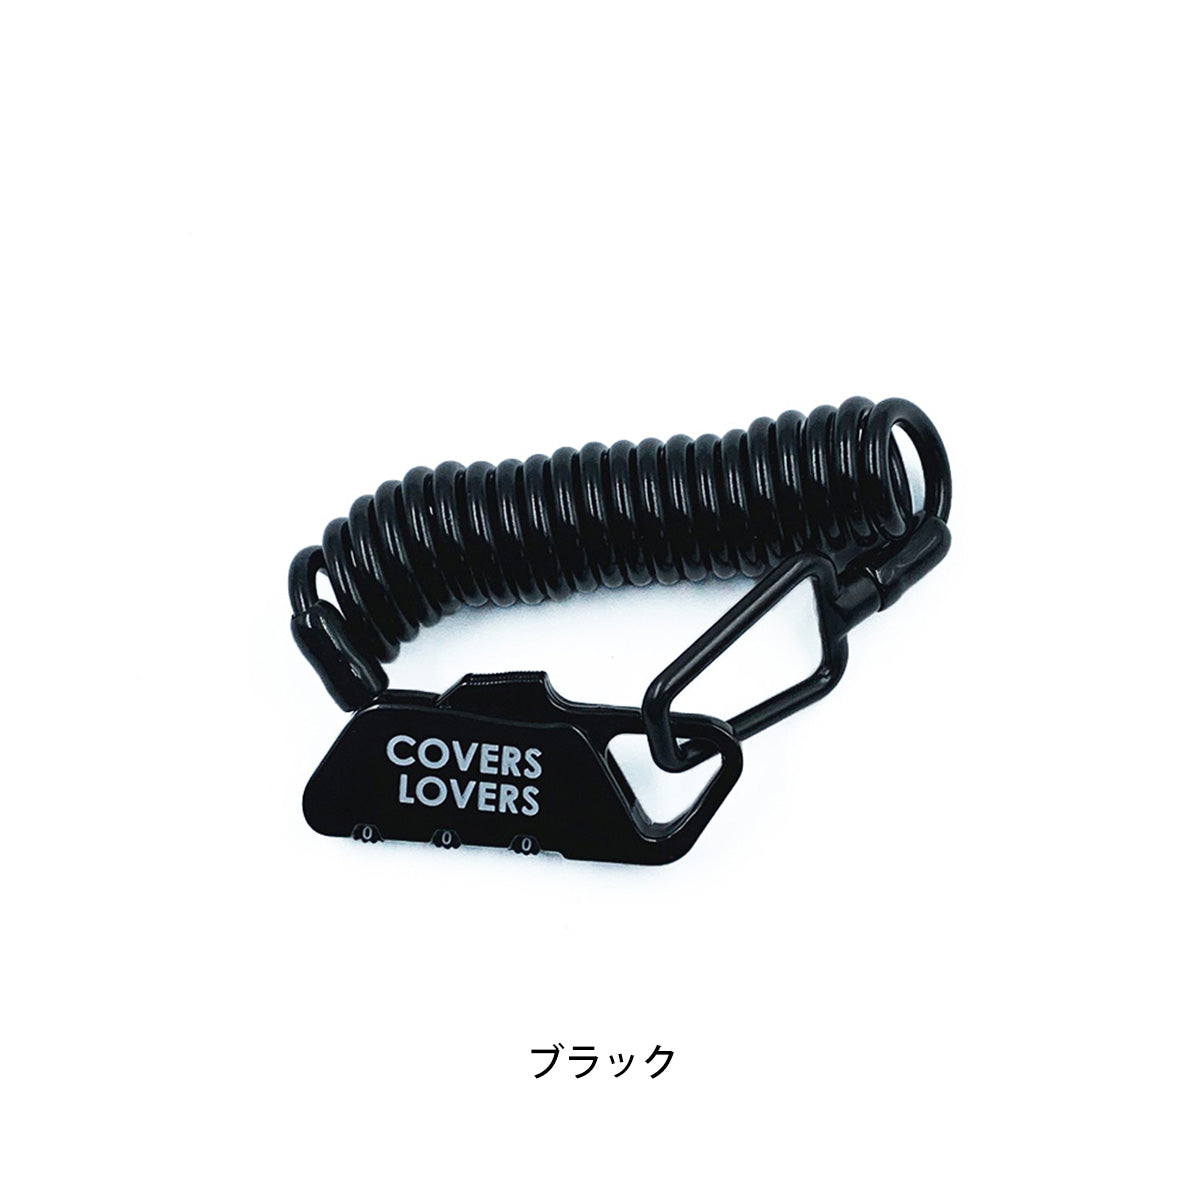 COVERS LOVERS バッテリーロック (コイルダイヤルケーブル) カギ [CL BatteryLock]